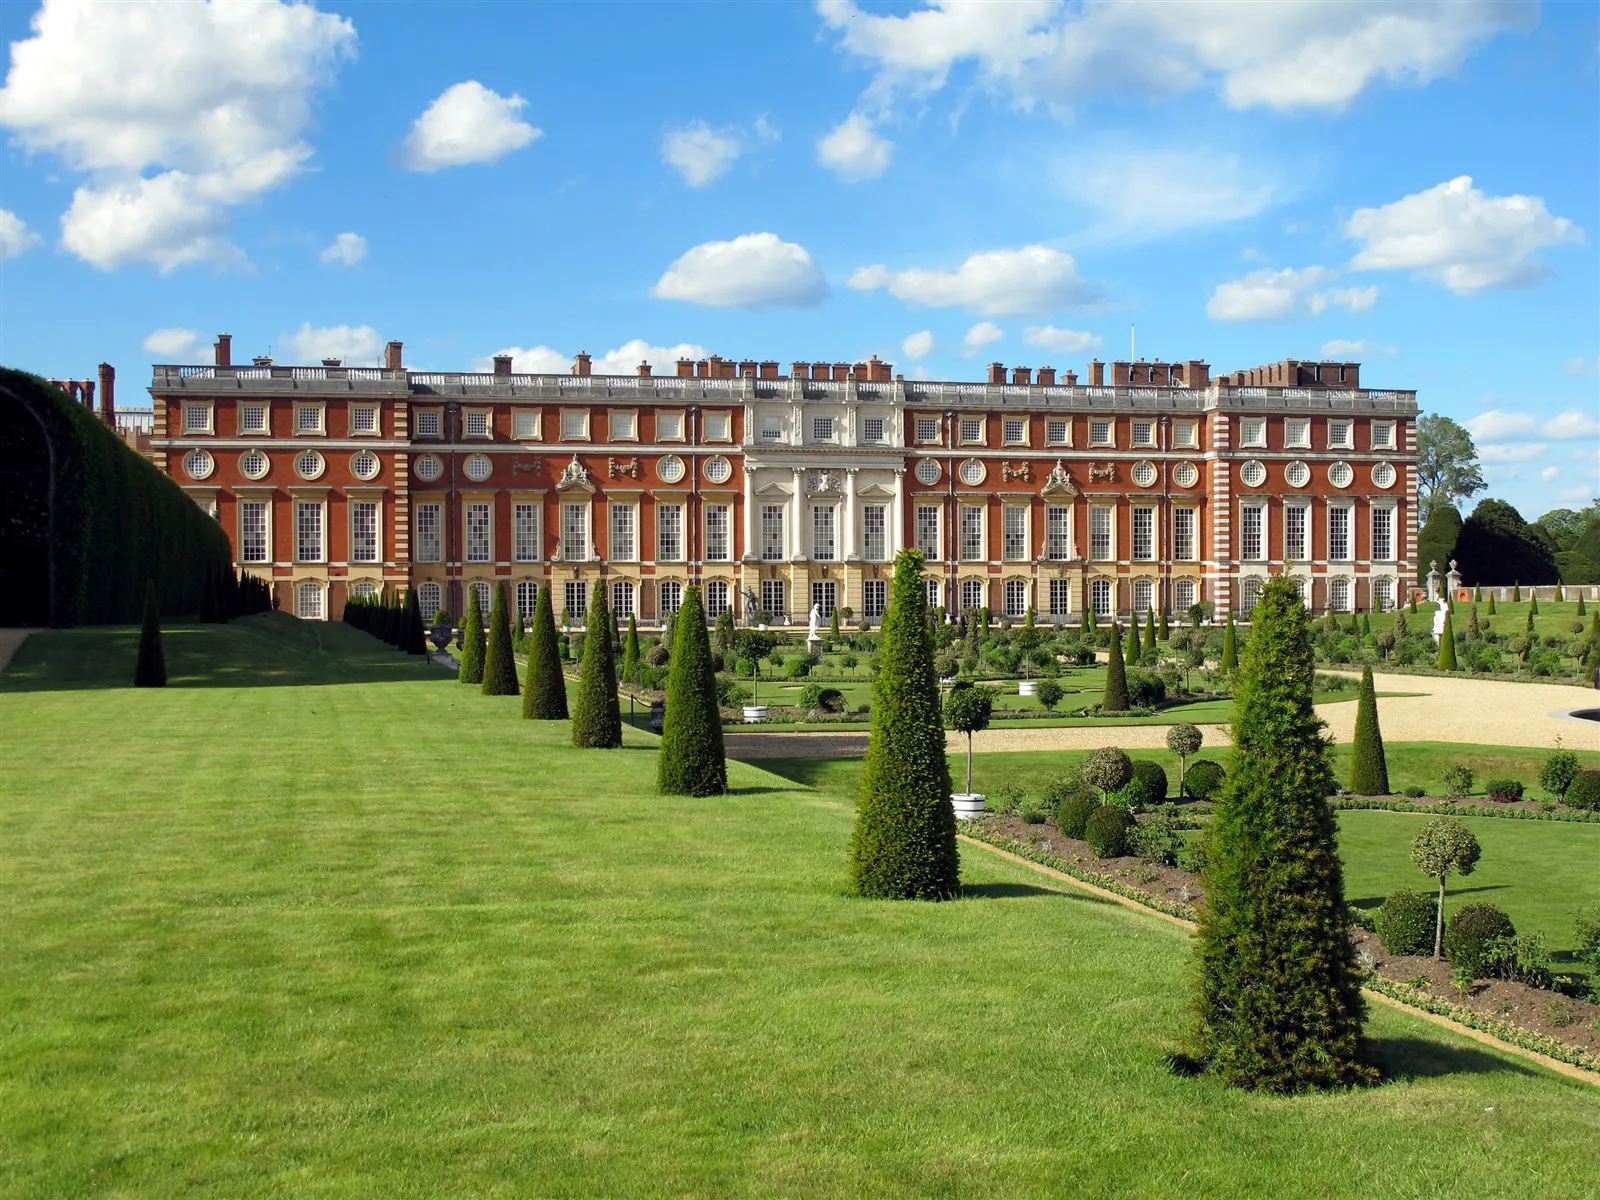 How to make the most of the Hampton Court Food Festival